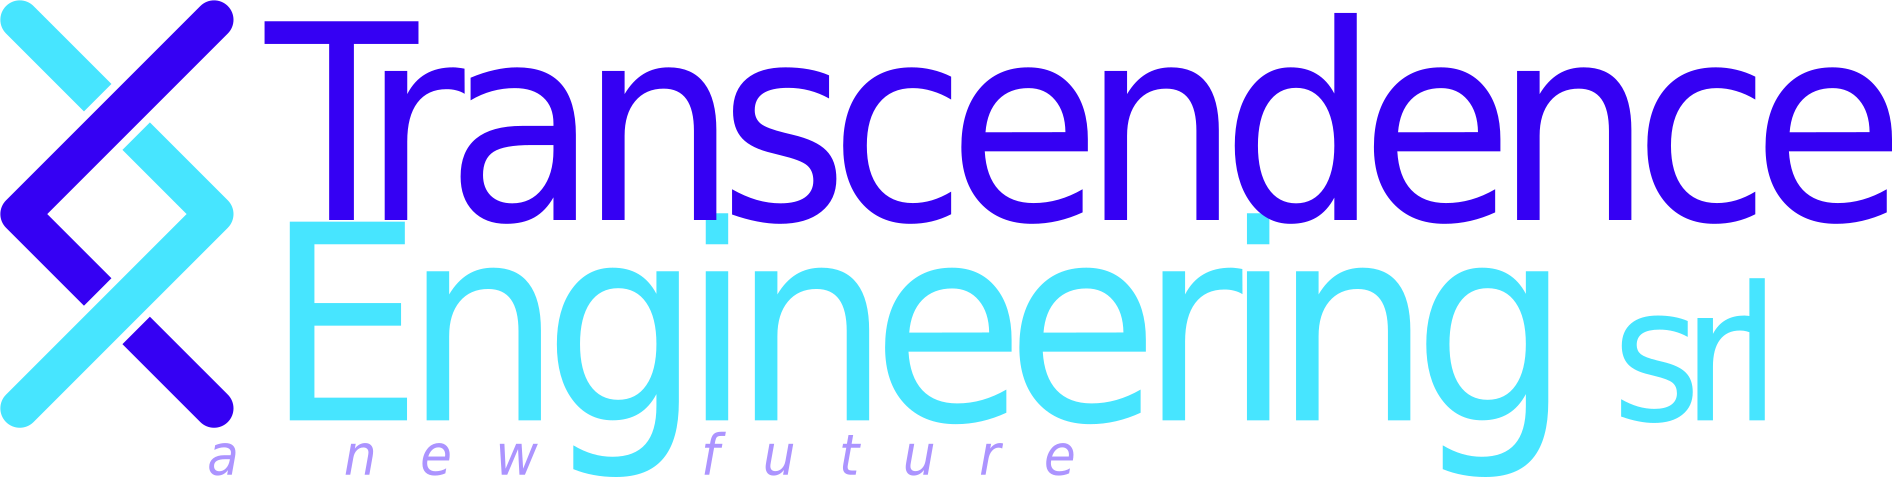 Transcendence Engineering srl - A new future